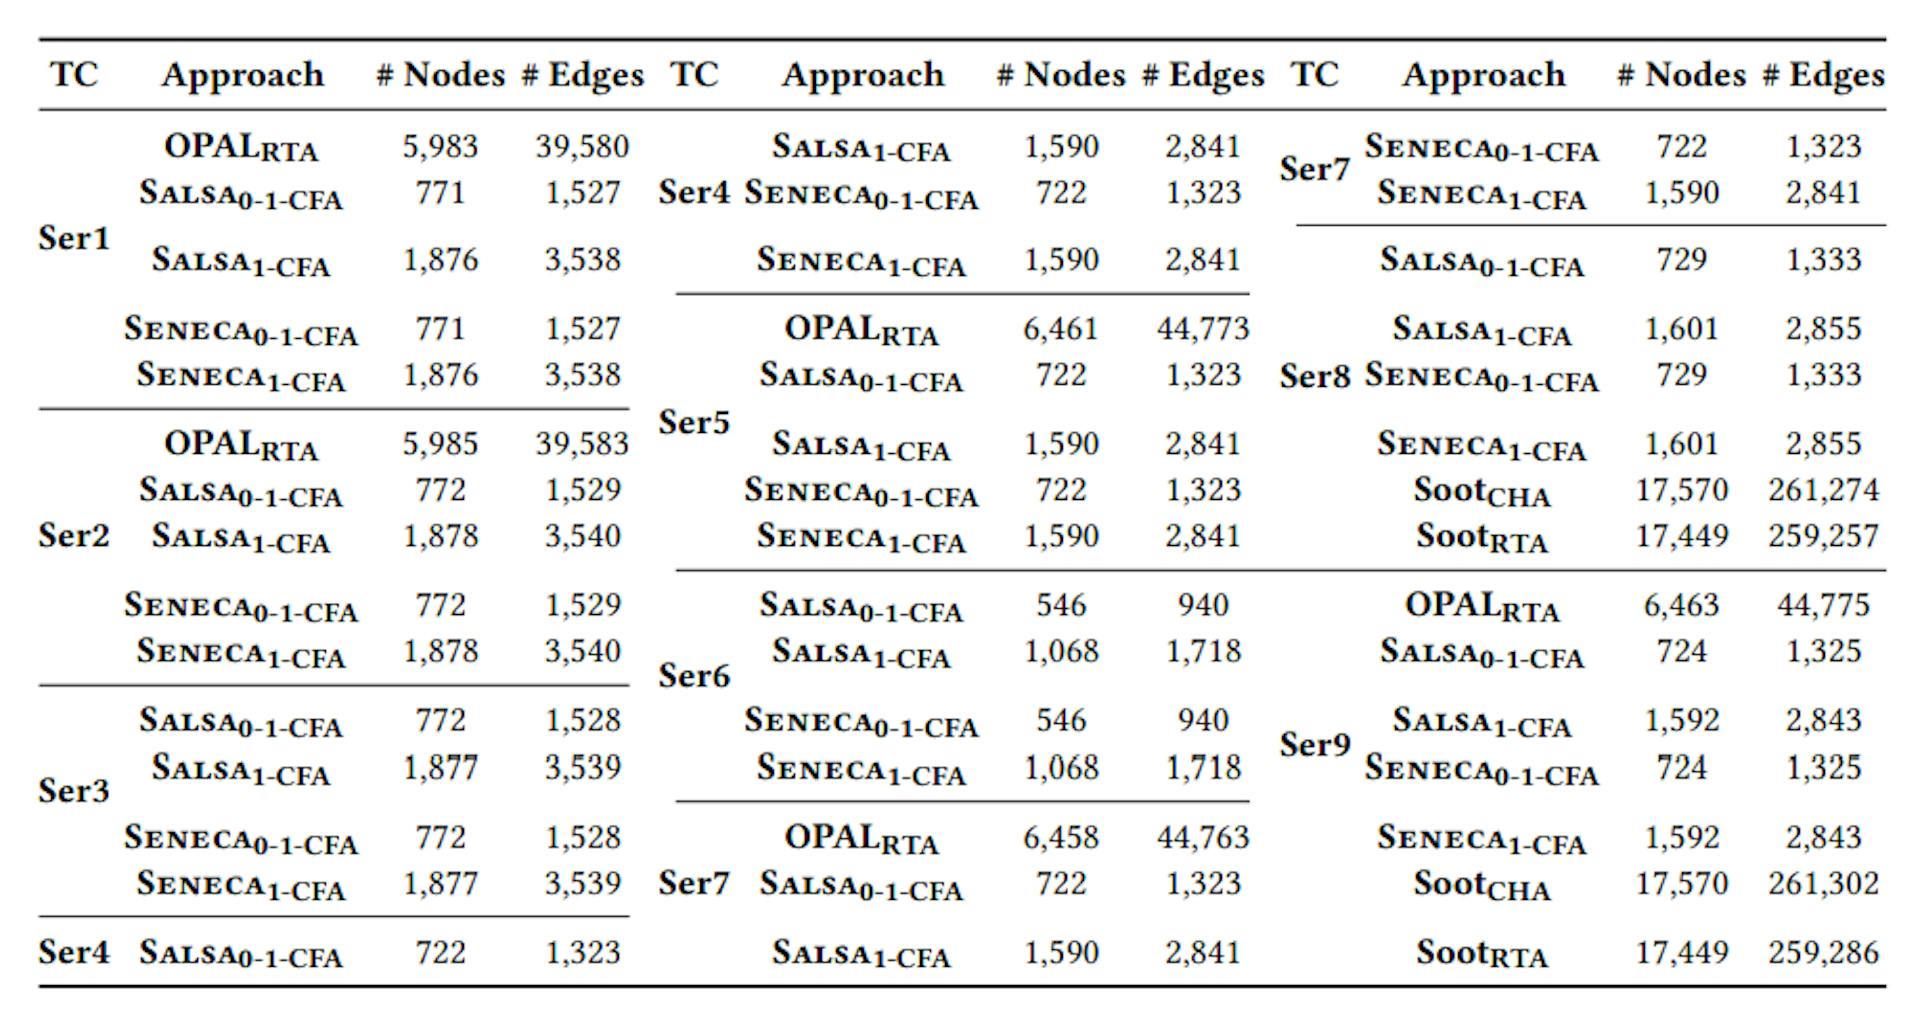 Table 5. Call Graph sizes for each approach